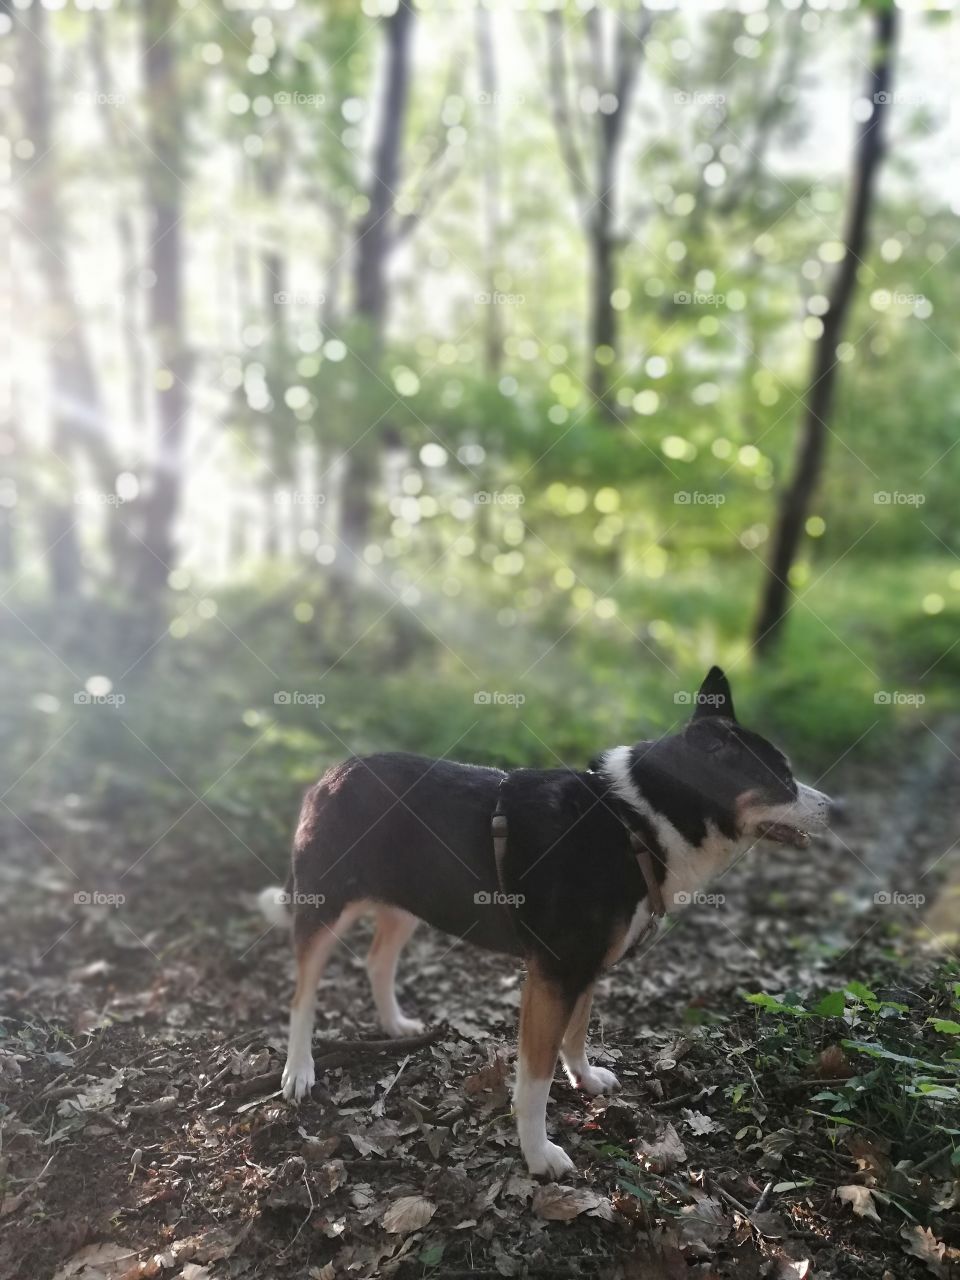 Little dog in the forest with sunlight filtering through trees